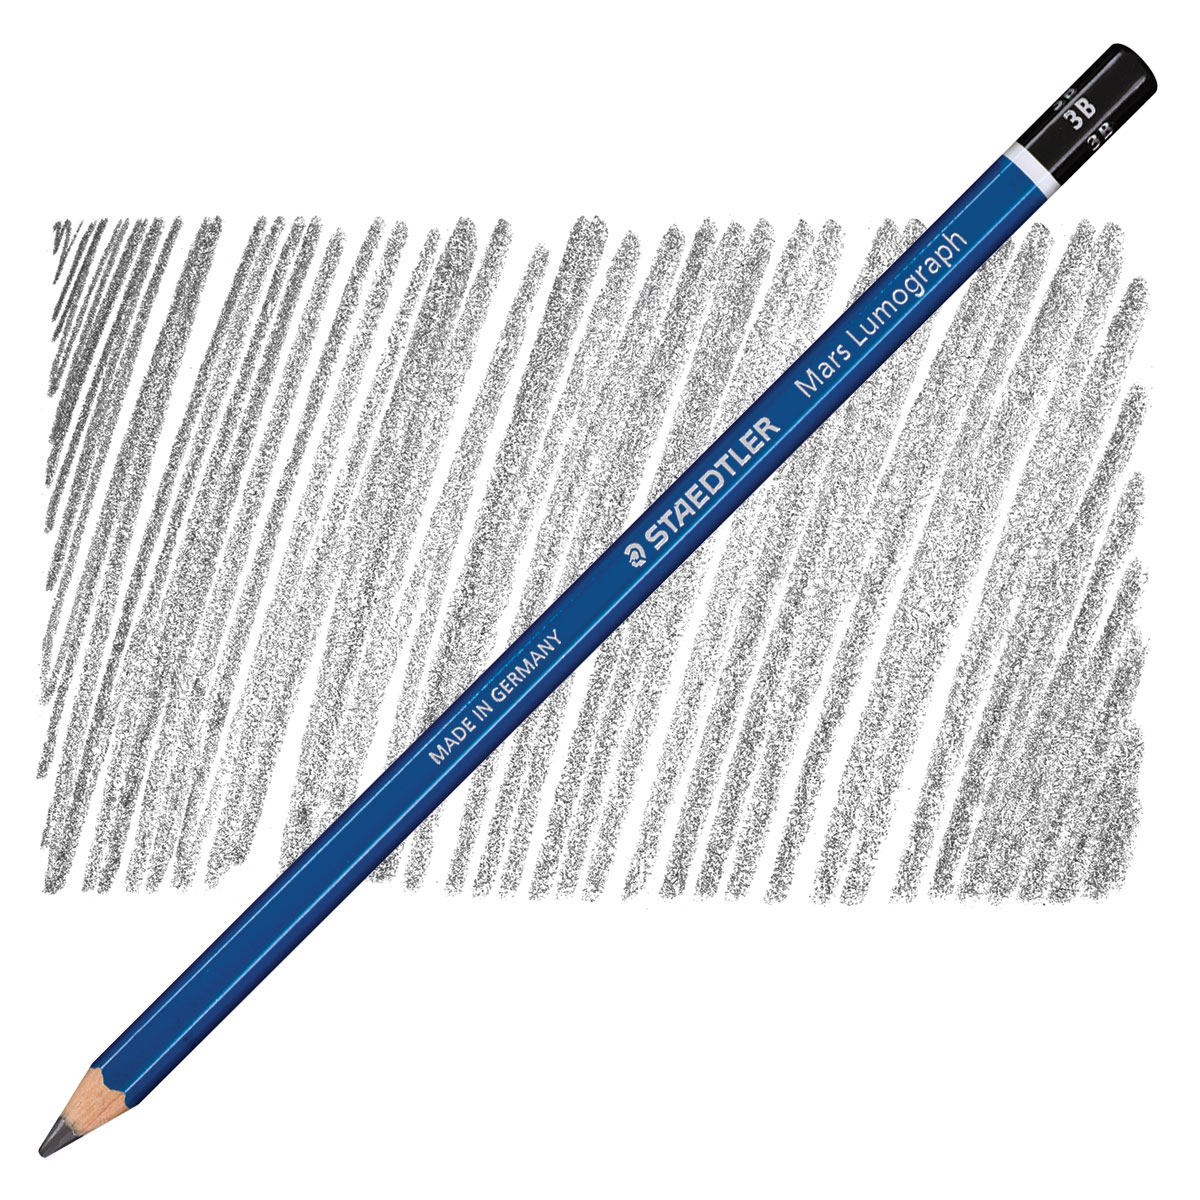 Art Supplies Reviews and Manga Cartoon Sketching: Quick! Sharpen your Staedtler  Mars Lumograph pencils and get drawing